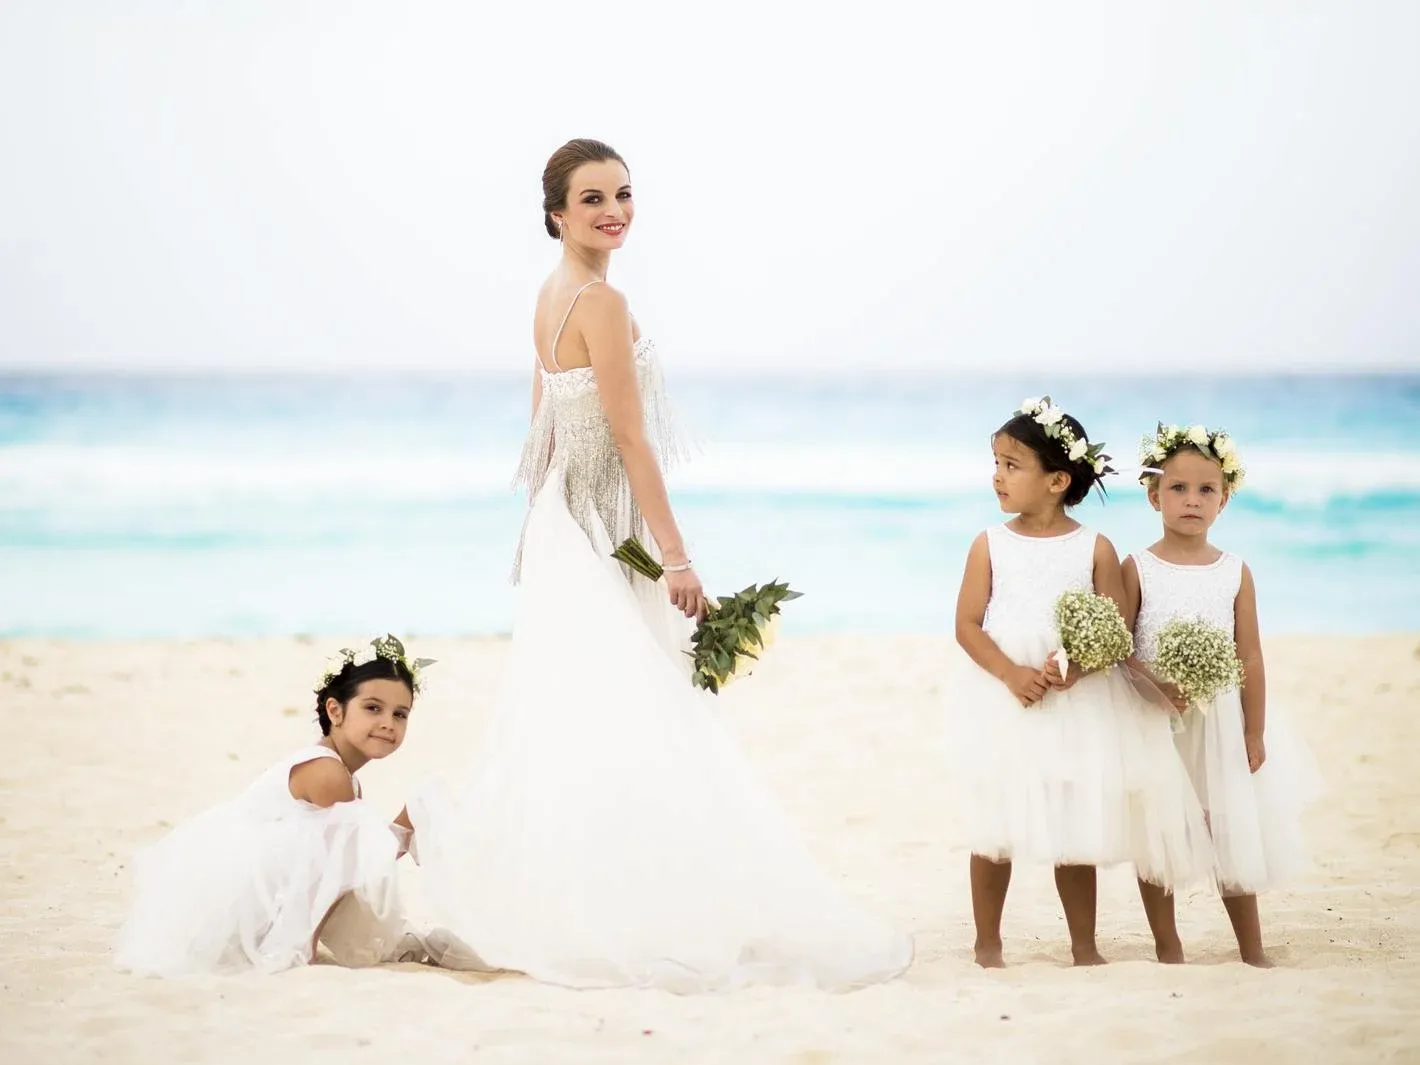 Bride & flower girls by the Beach at La Colección Resorts